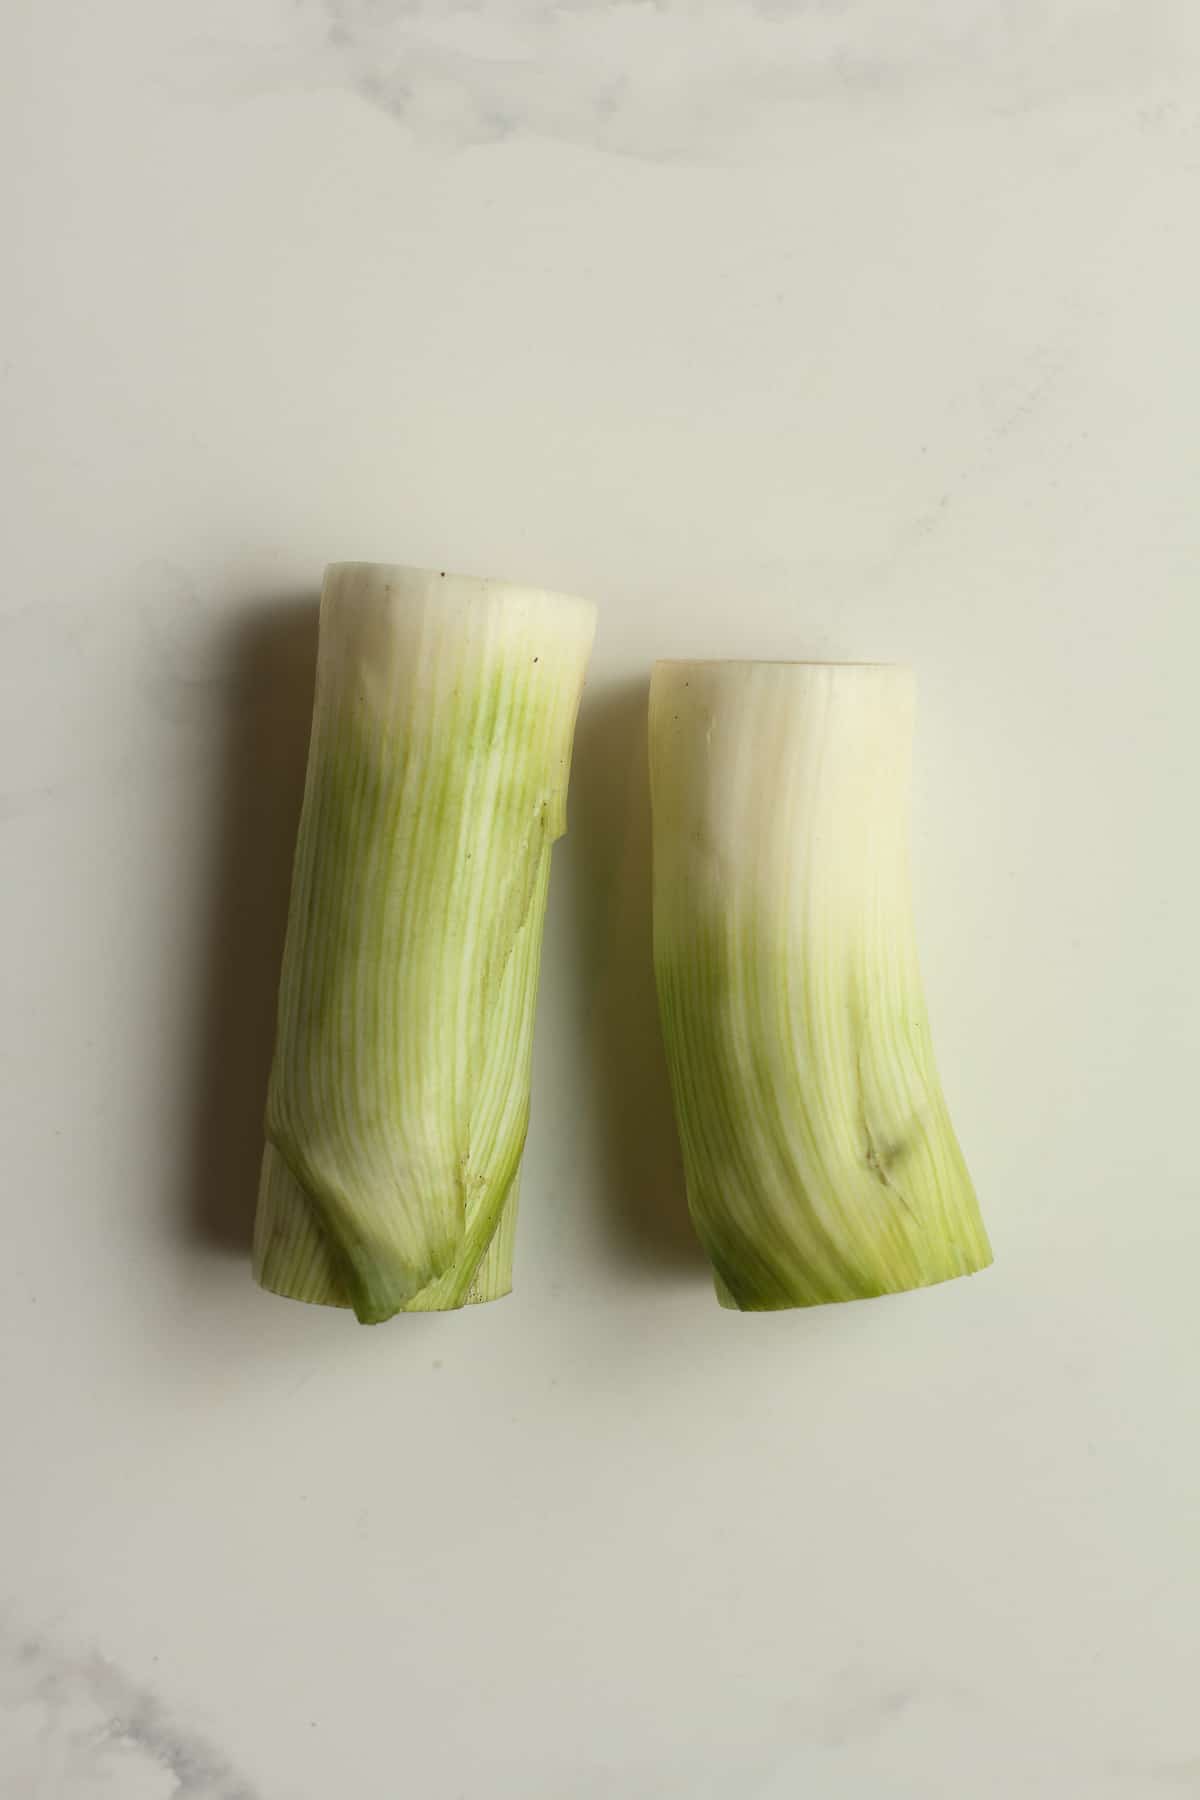 Two partial leeks.